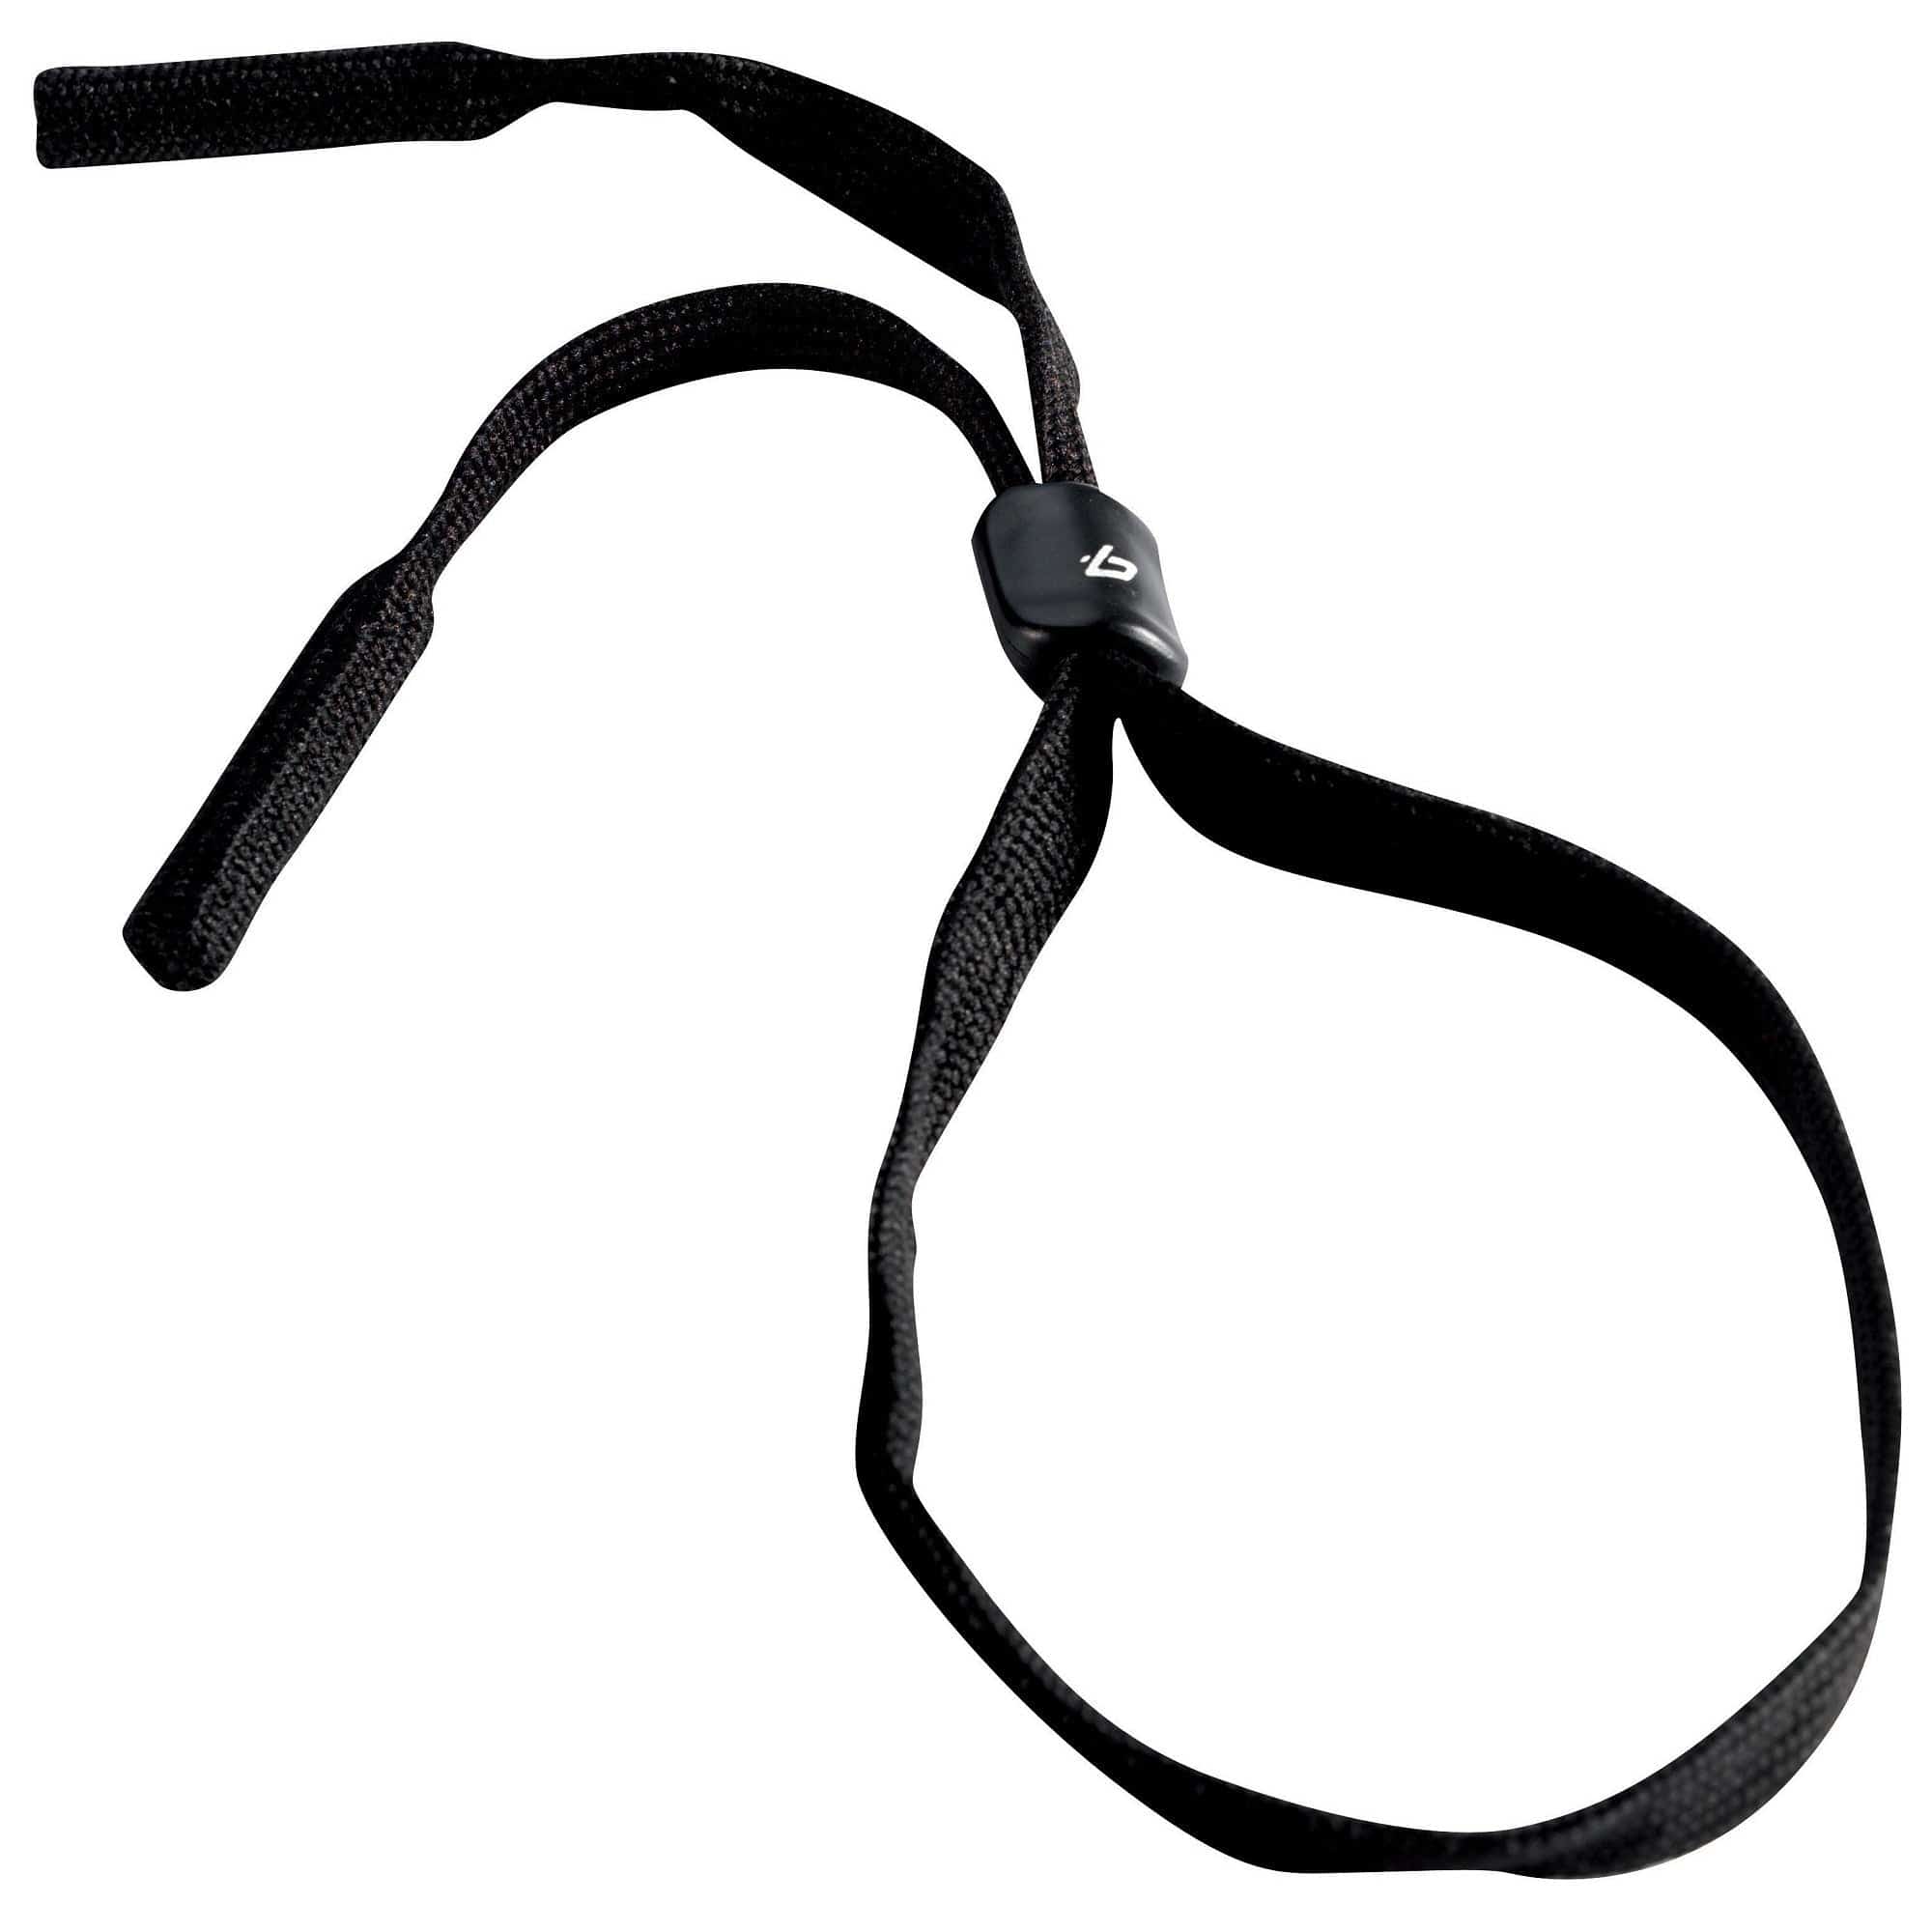 Bolle Lowrider Safety Glasses Adjustable Neck Cord